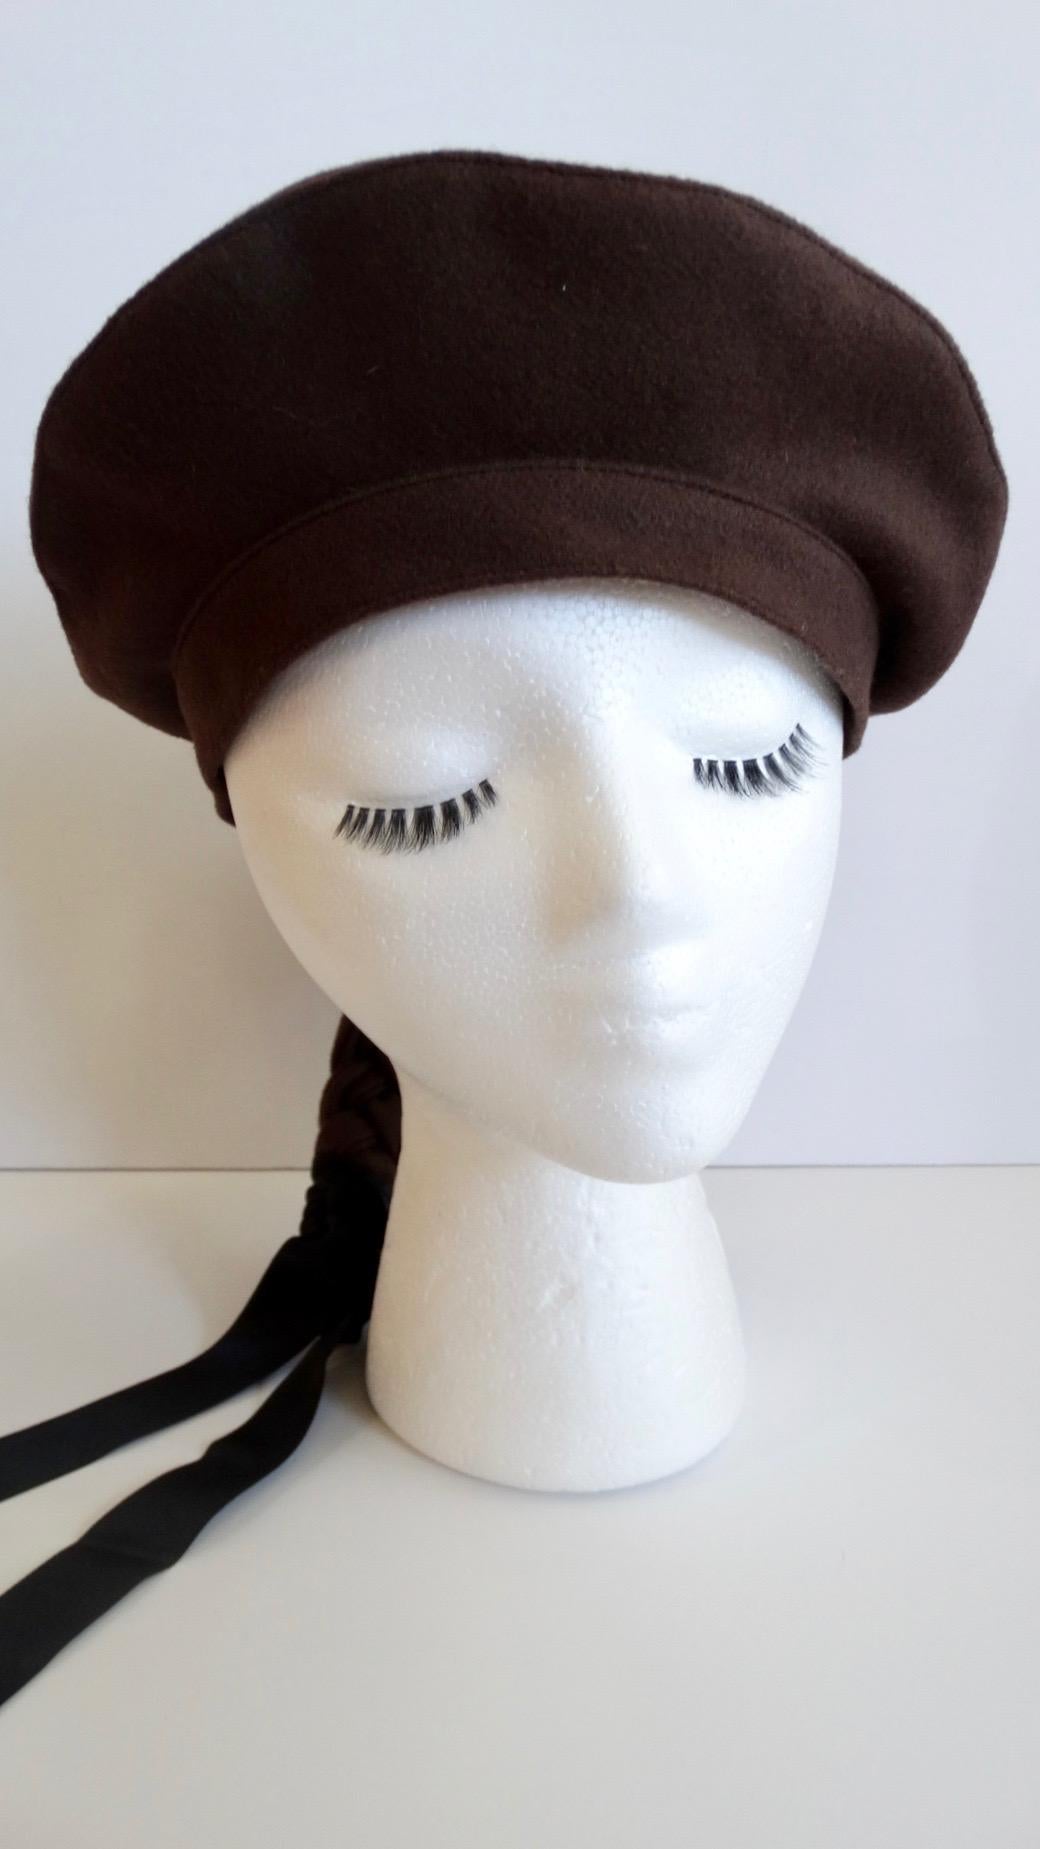 Elevate Your Hat Game With This Amazing Beret! Circa 1990s, this Gilles Francois French felt beret is a rich chocolate brown color and features a braided ponytail accent complete with a black ribbon tied at the end. On the side is a small millefiori